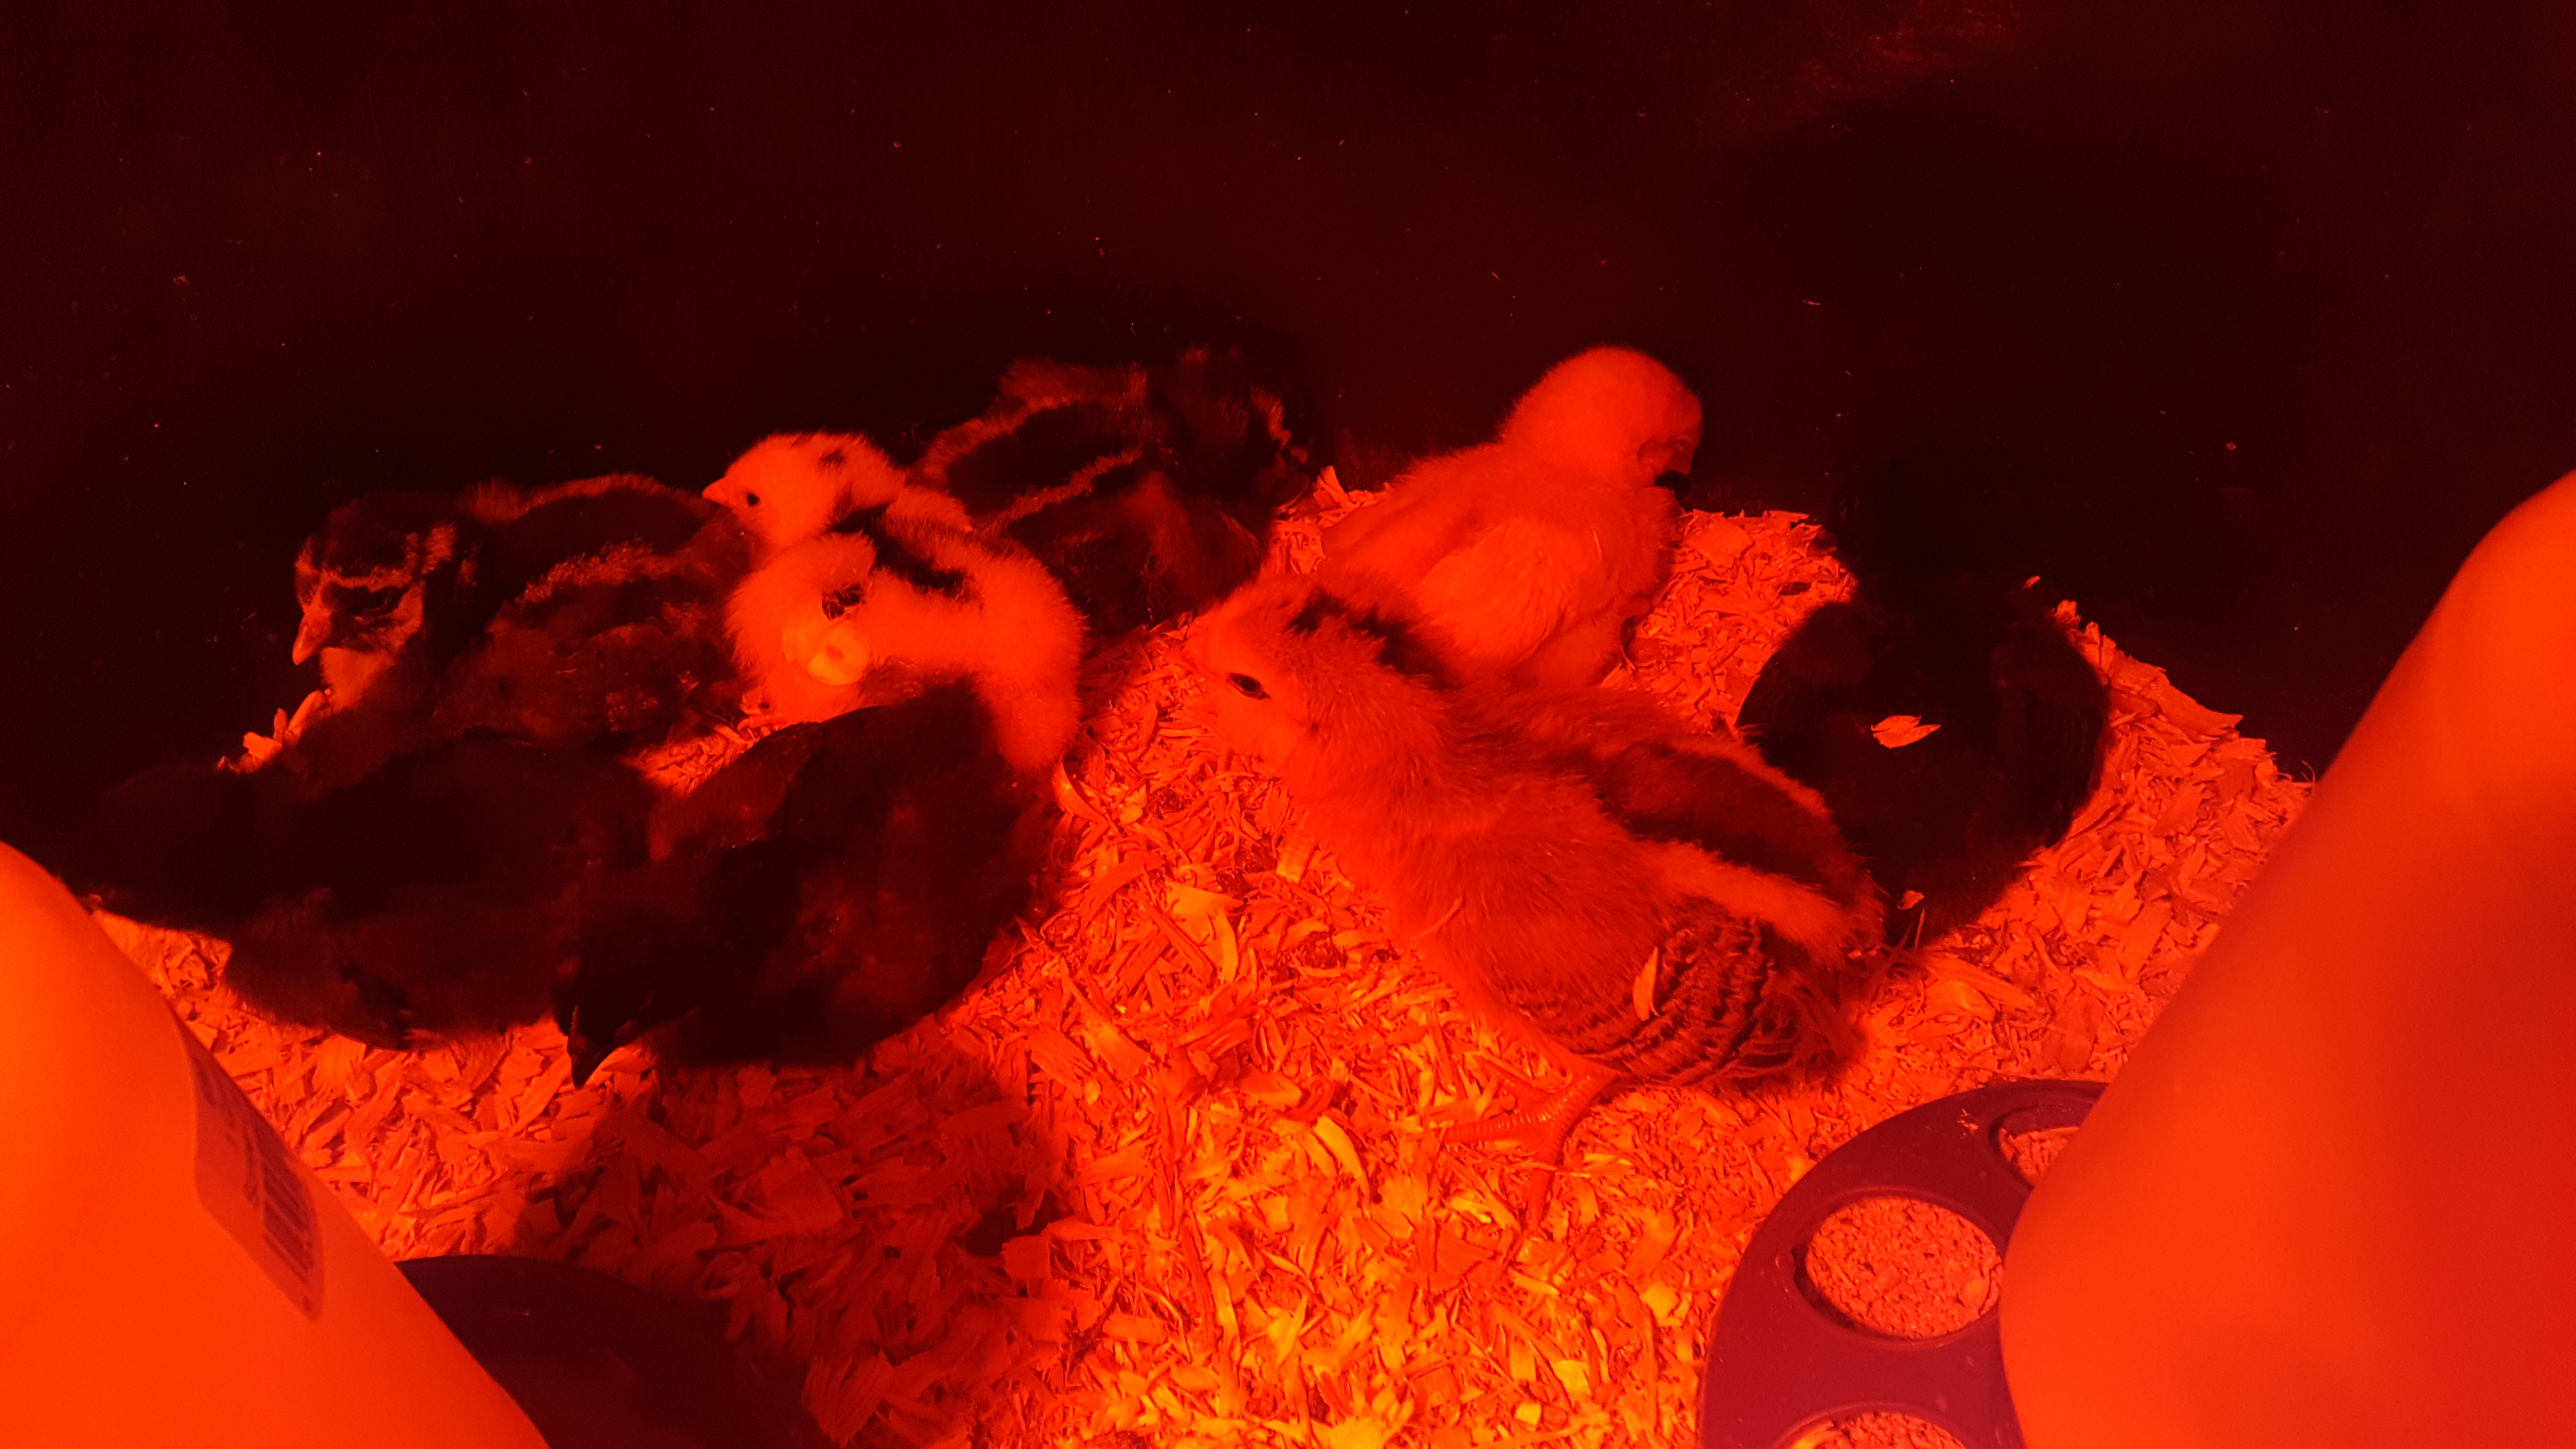 All of my chicks, they are about 3 weeks old.